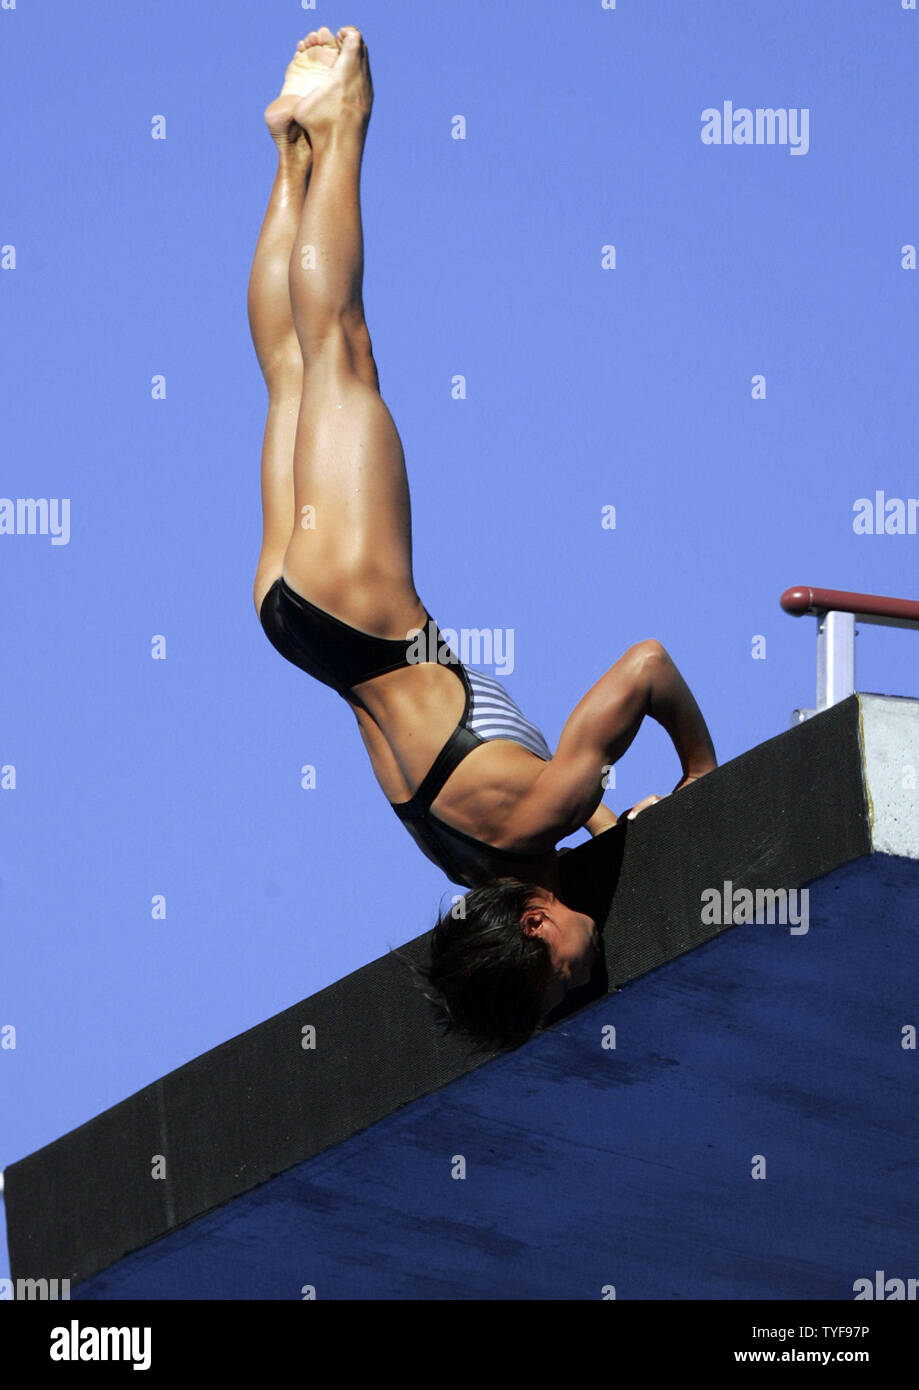 Chinese diver Tong Jia pushes off the 10-meter tower from a handstand in the finals at the XI FINA World Championships in Montreal, Canada on July 20, 2005.  Miss Jia, who earlier won the 10-meter synchronized platform competition, adds a bronze medal with 550.98 points behind American Laura Wilkinson and Loudy Tourky of Australia. (UPI Photo / Grace Chiu) Stock Photo